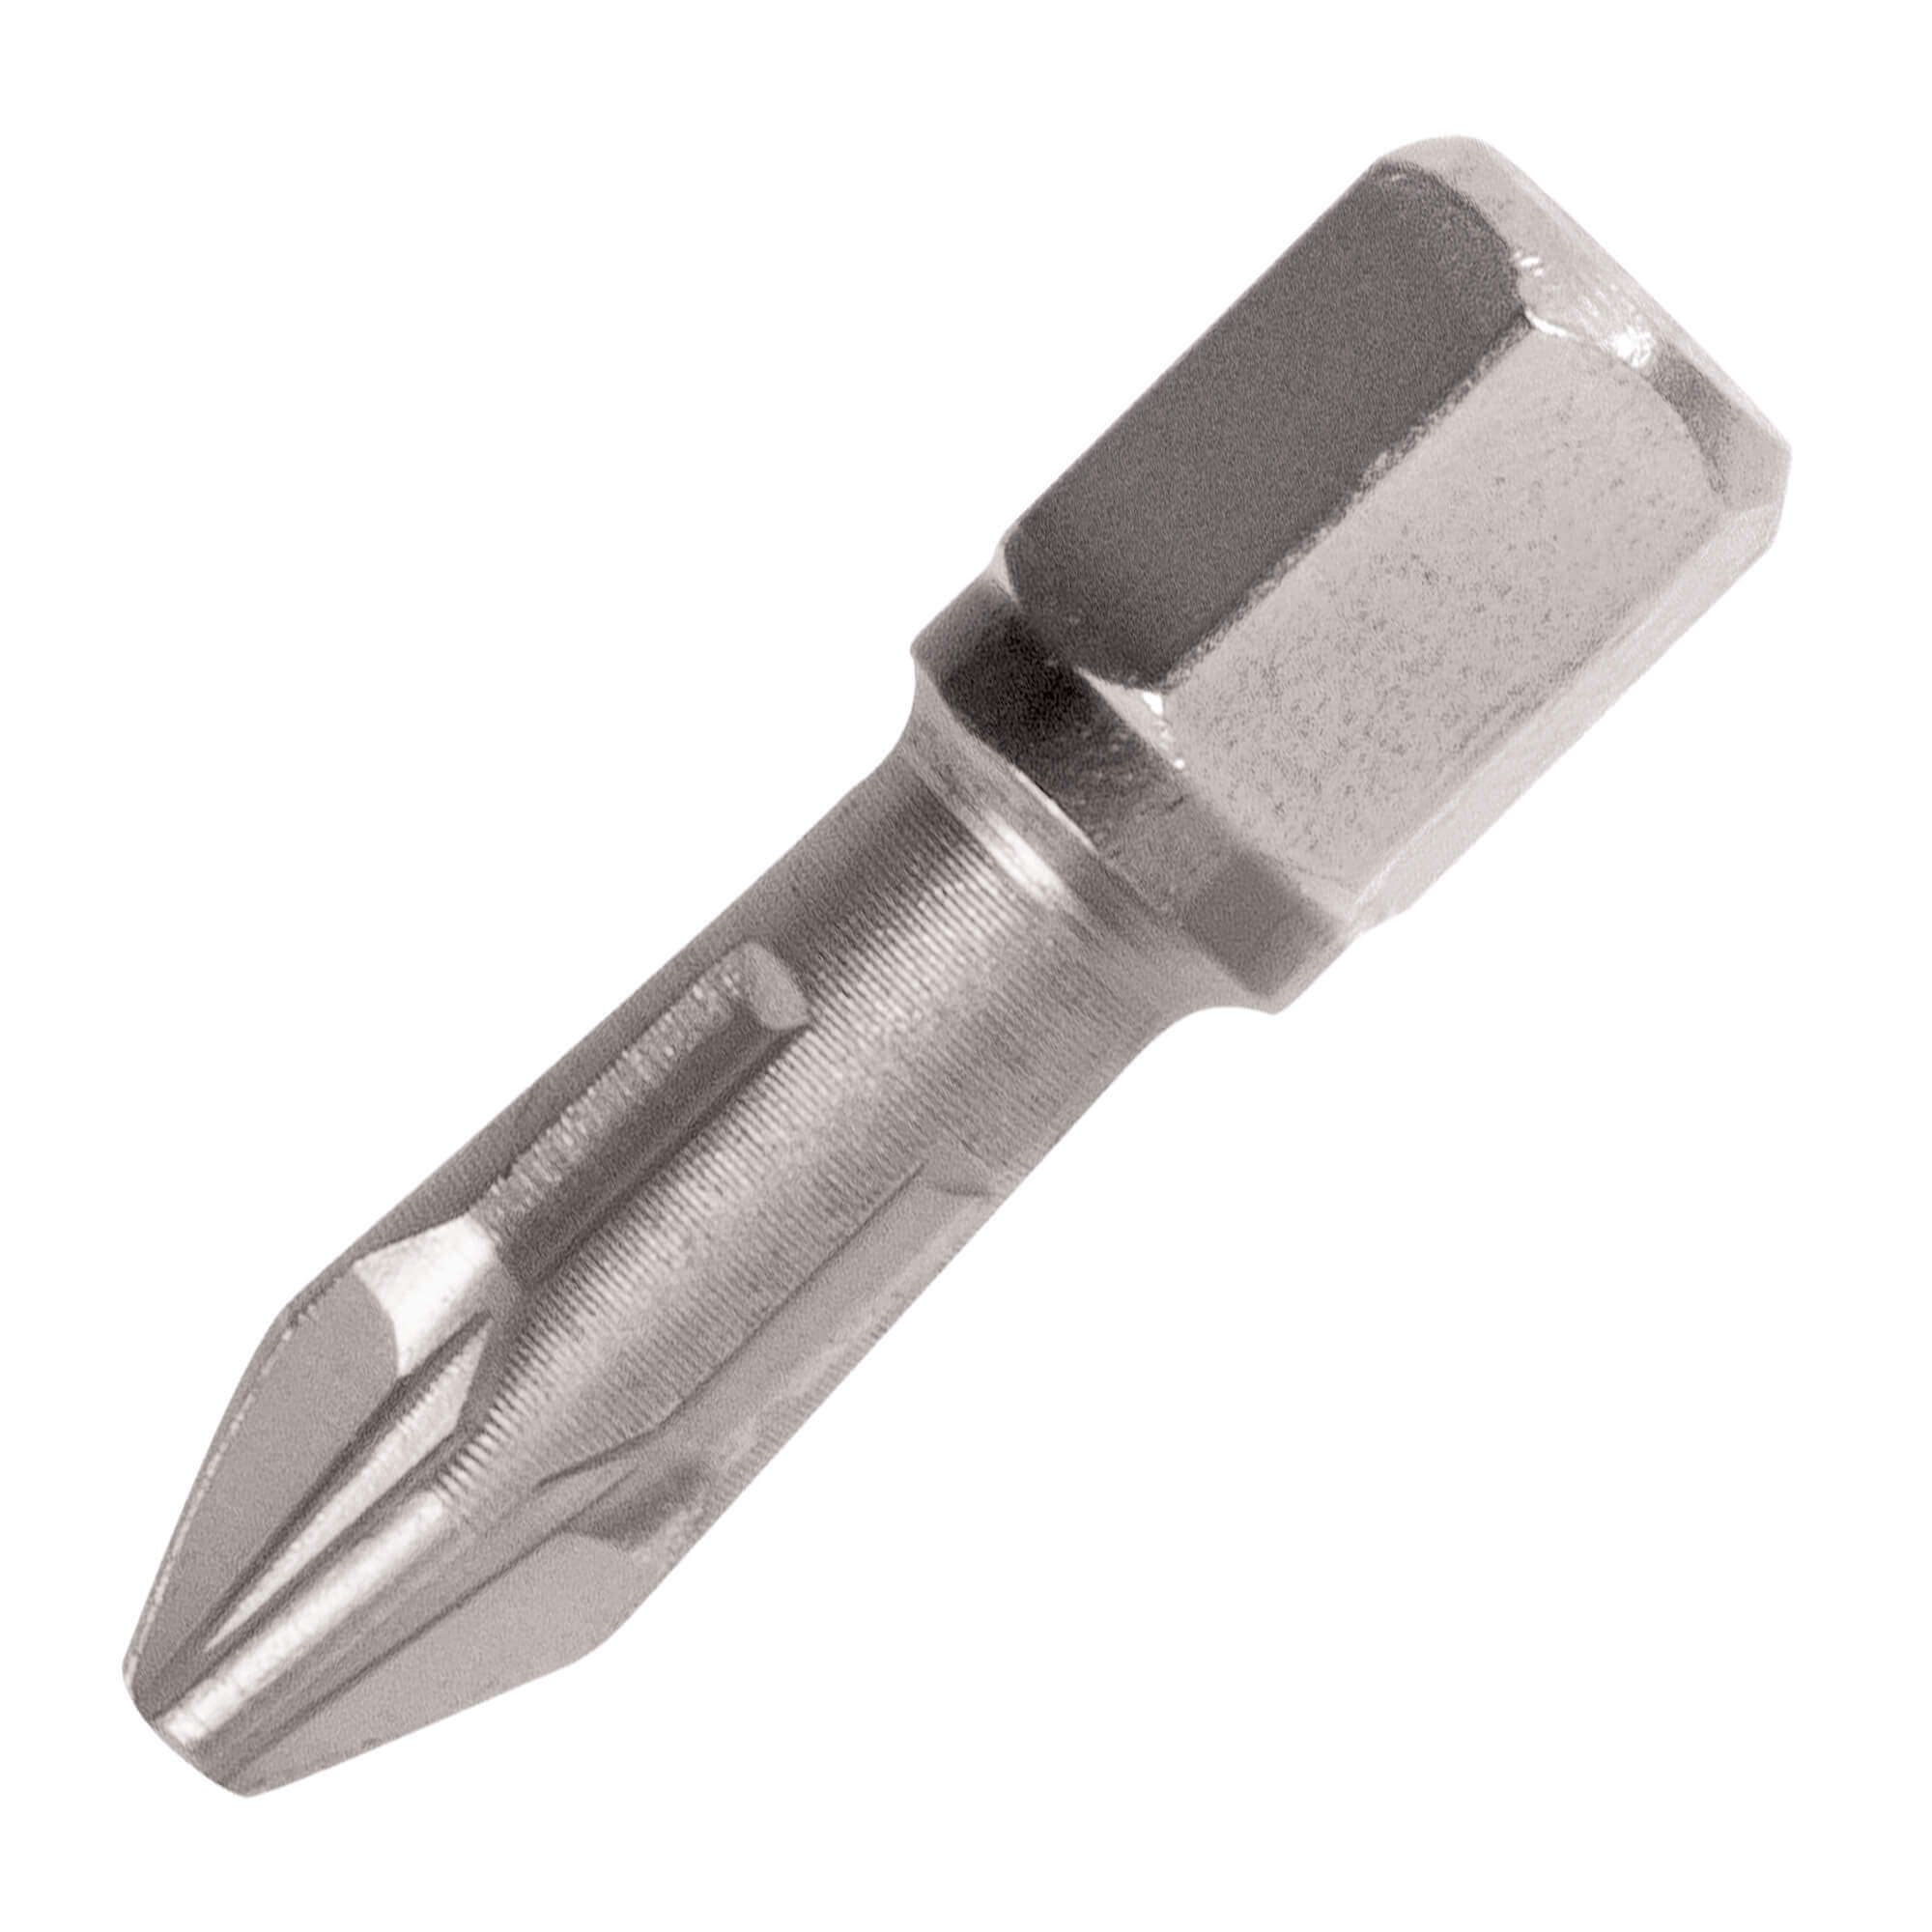 Photo of Trend Snappy Tin Coated Pozi Screwdriver Bits Pz2 25mm Pack Of 10